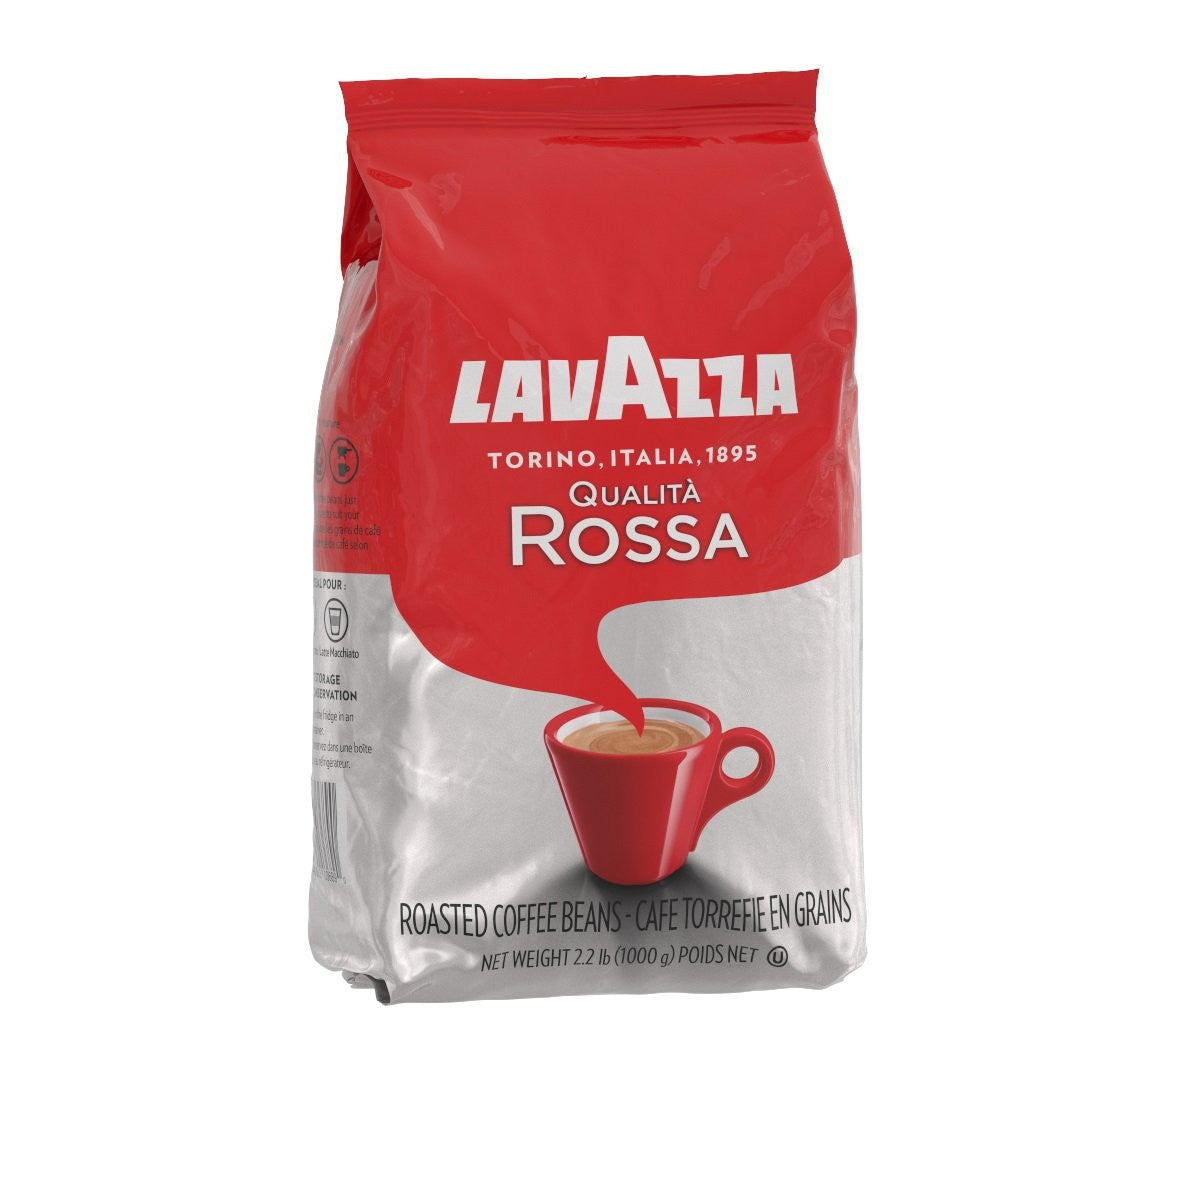 Lavazza Qualita Rossa, Italian Coffee Beans Expresso, 1kg/2.2lbs., {Imported from Canada}